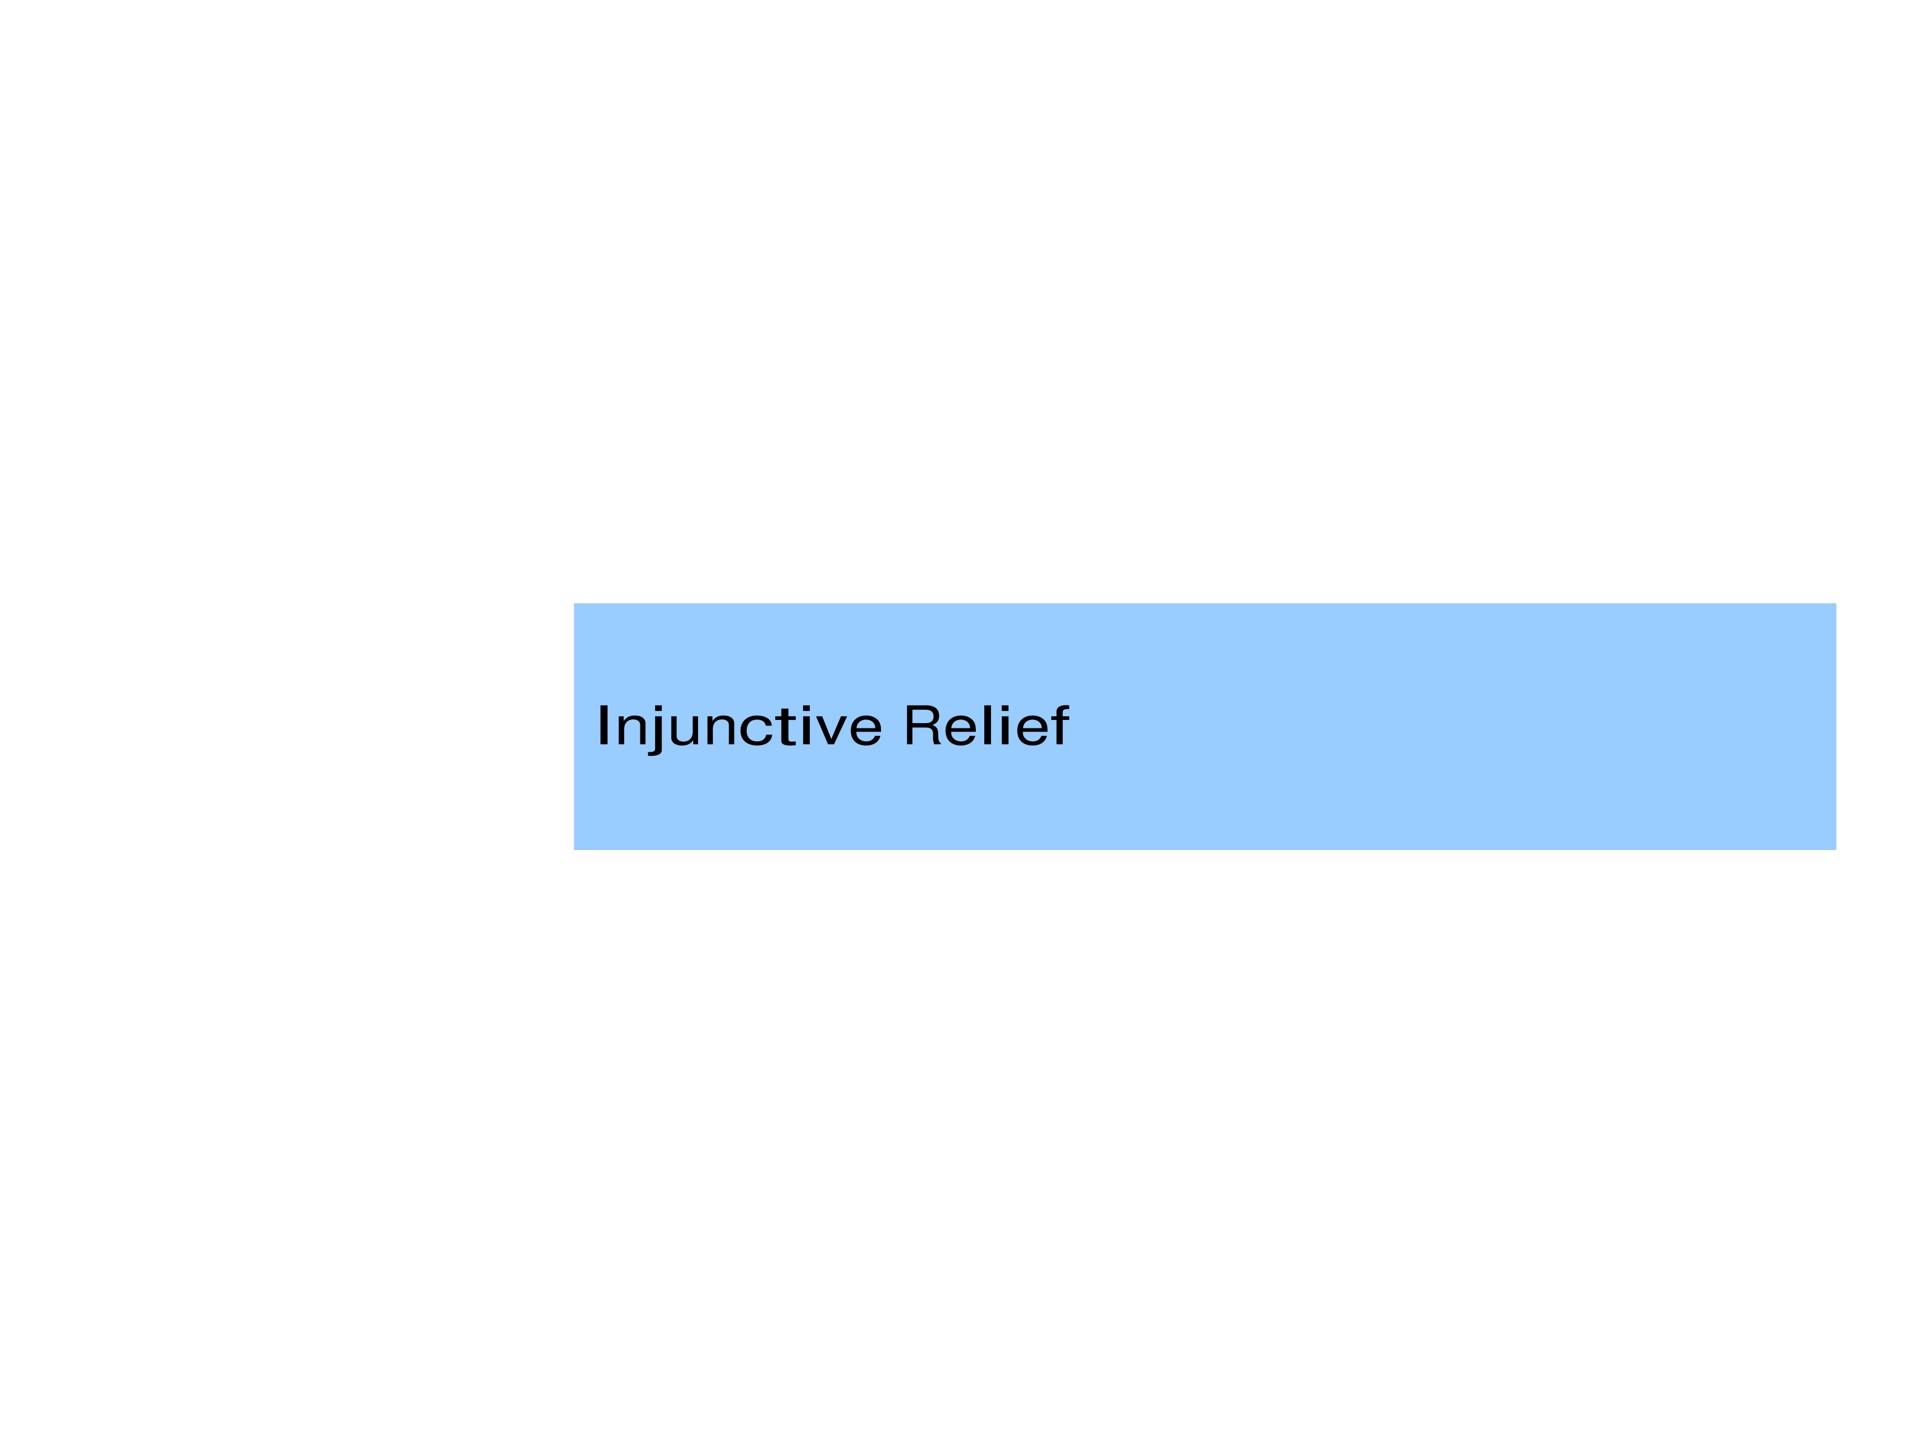 injunctive relief | Pershing Square